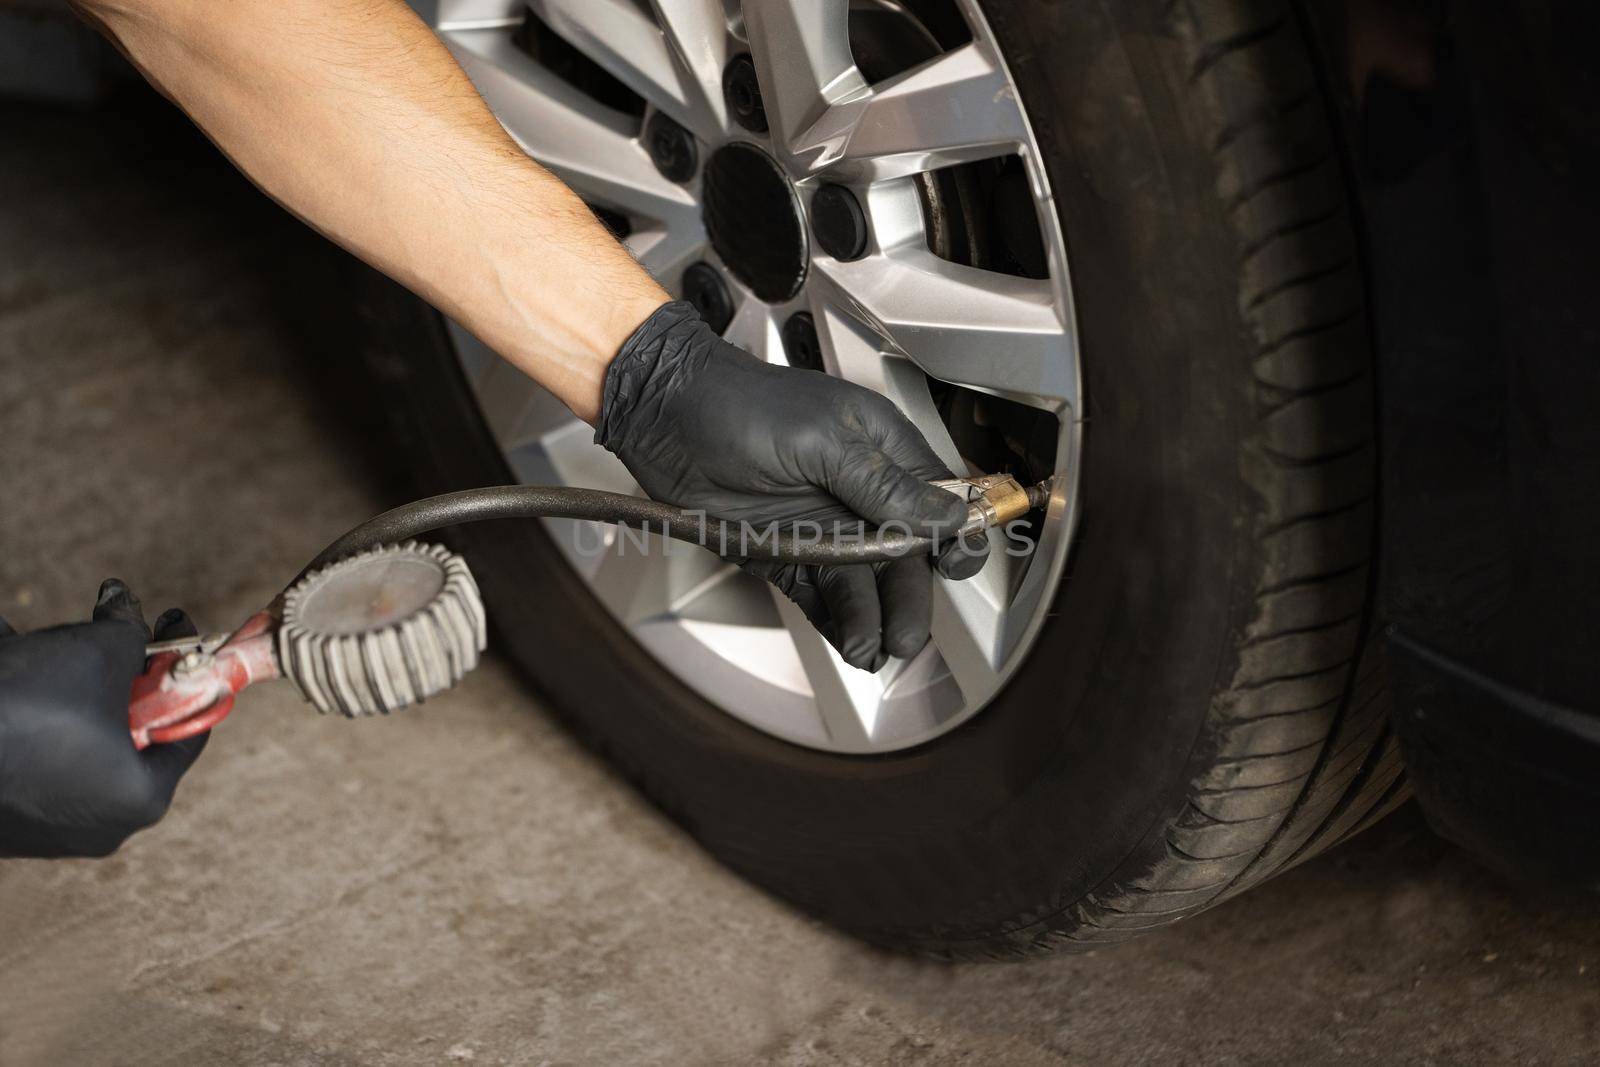 Car tire pressure check using air pressure guage. Mechanic inflating a car tire. Gas pumping of a car wheel. Car tire inflation by uflypro